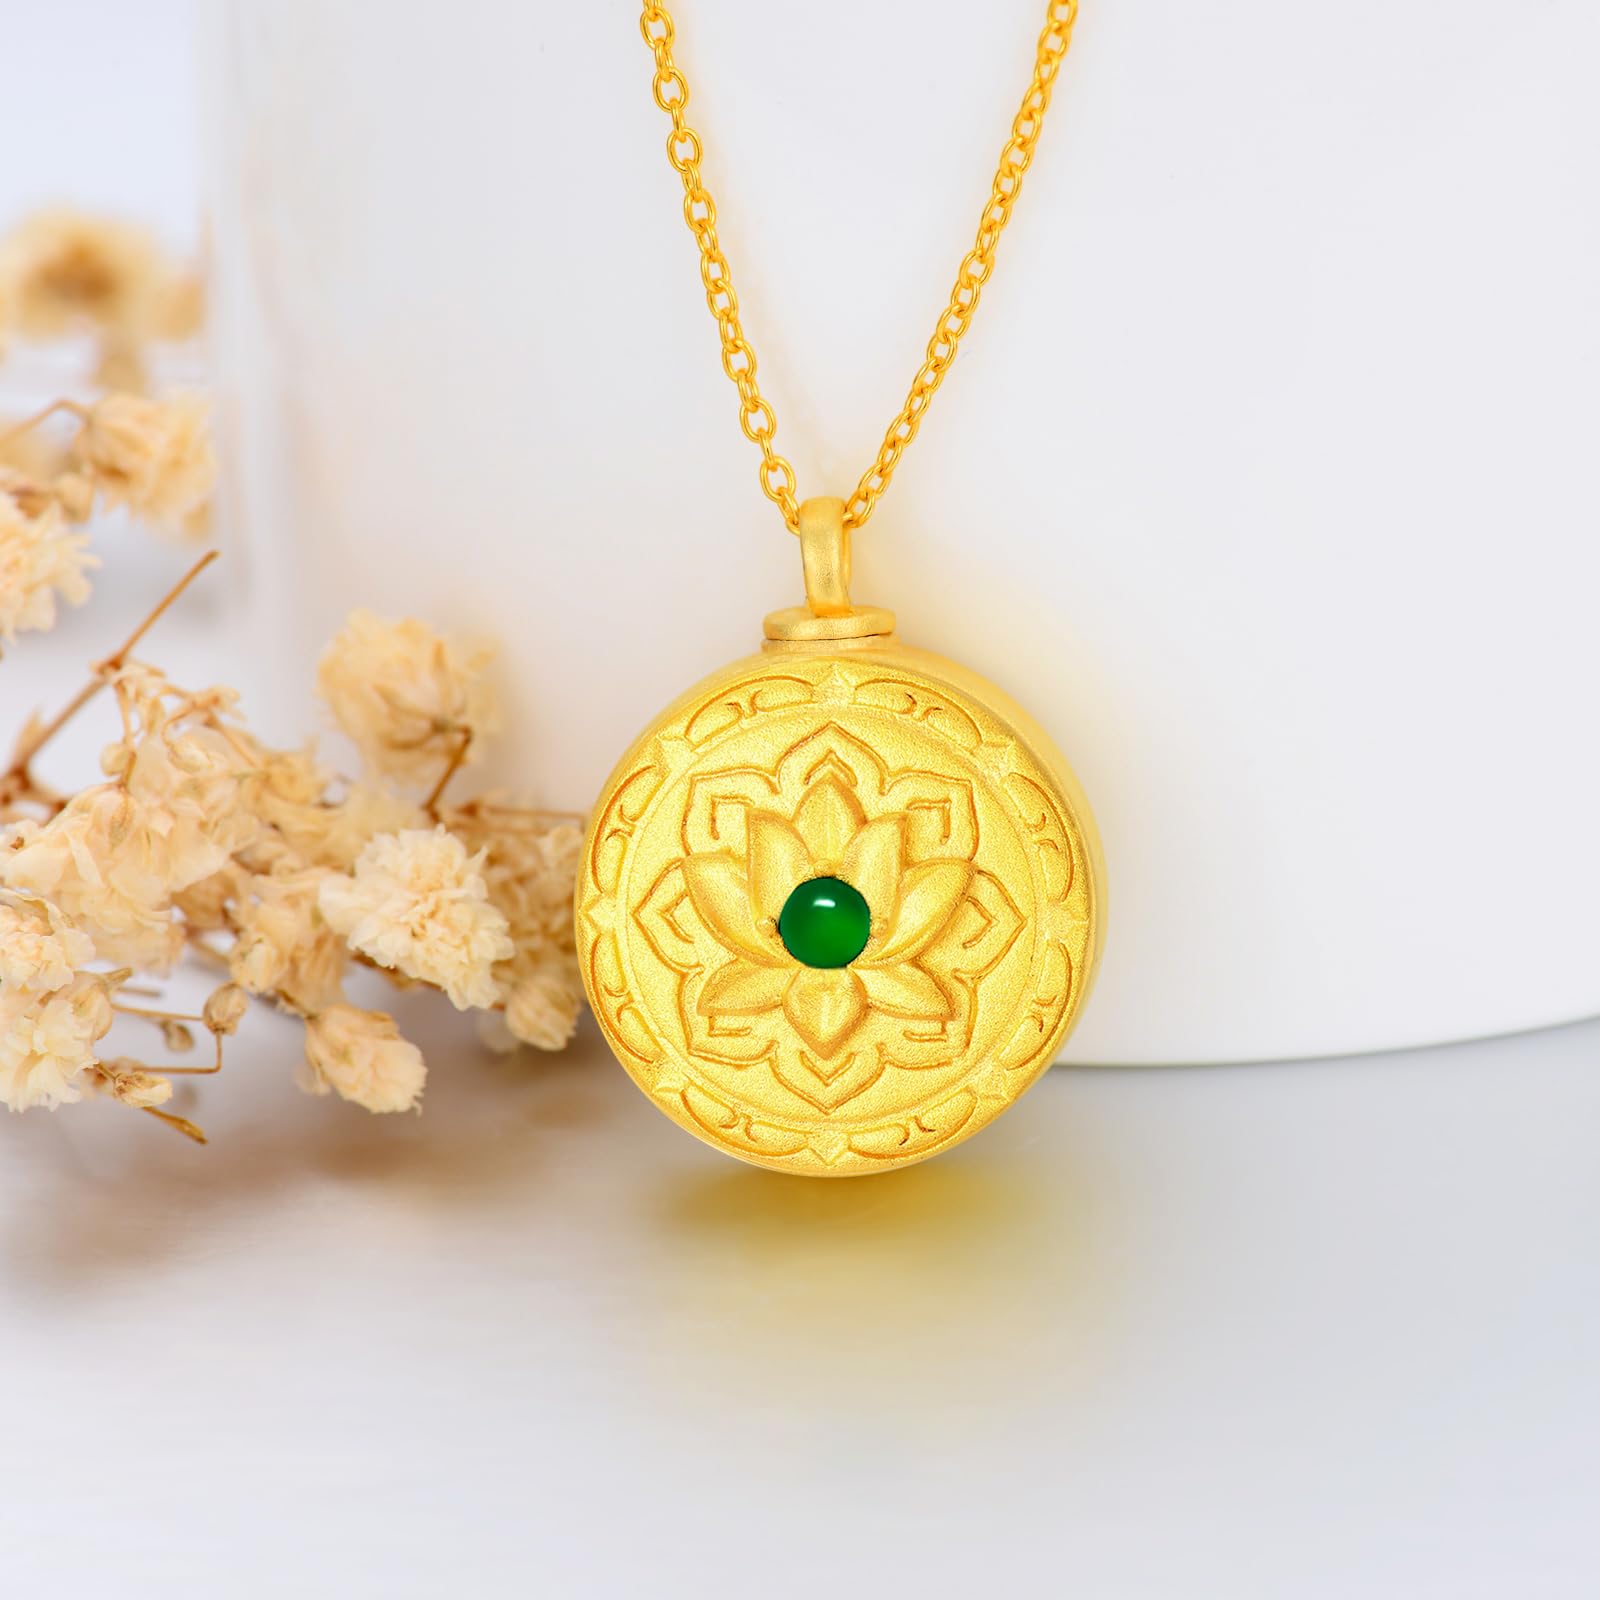 SOULMEET Real Gold Emerald Cremation Jewelry for Ashes, Personalized Gold Sunflower/Lotus/Rose/Cross/Medal Round Ashes Locket Necklace Natural Gemstone Urn Jewelry